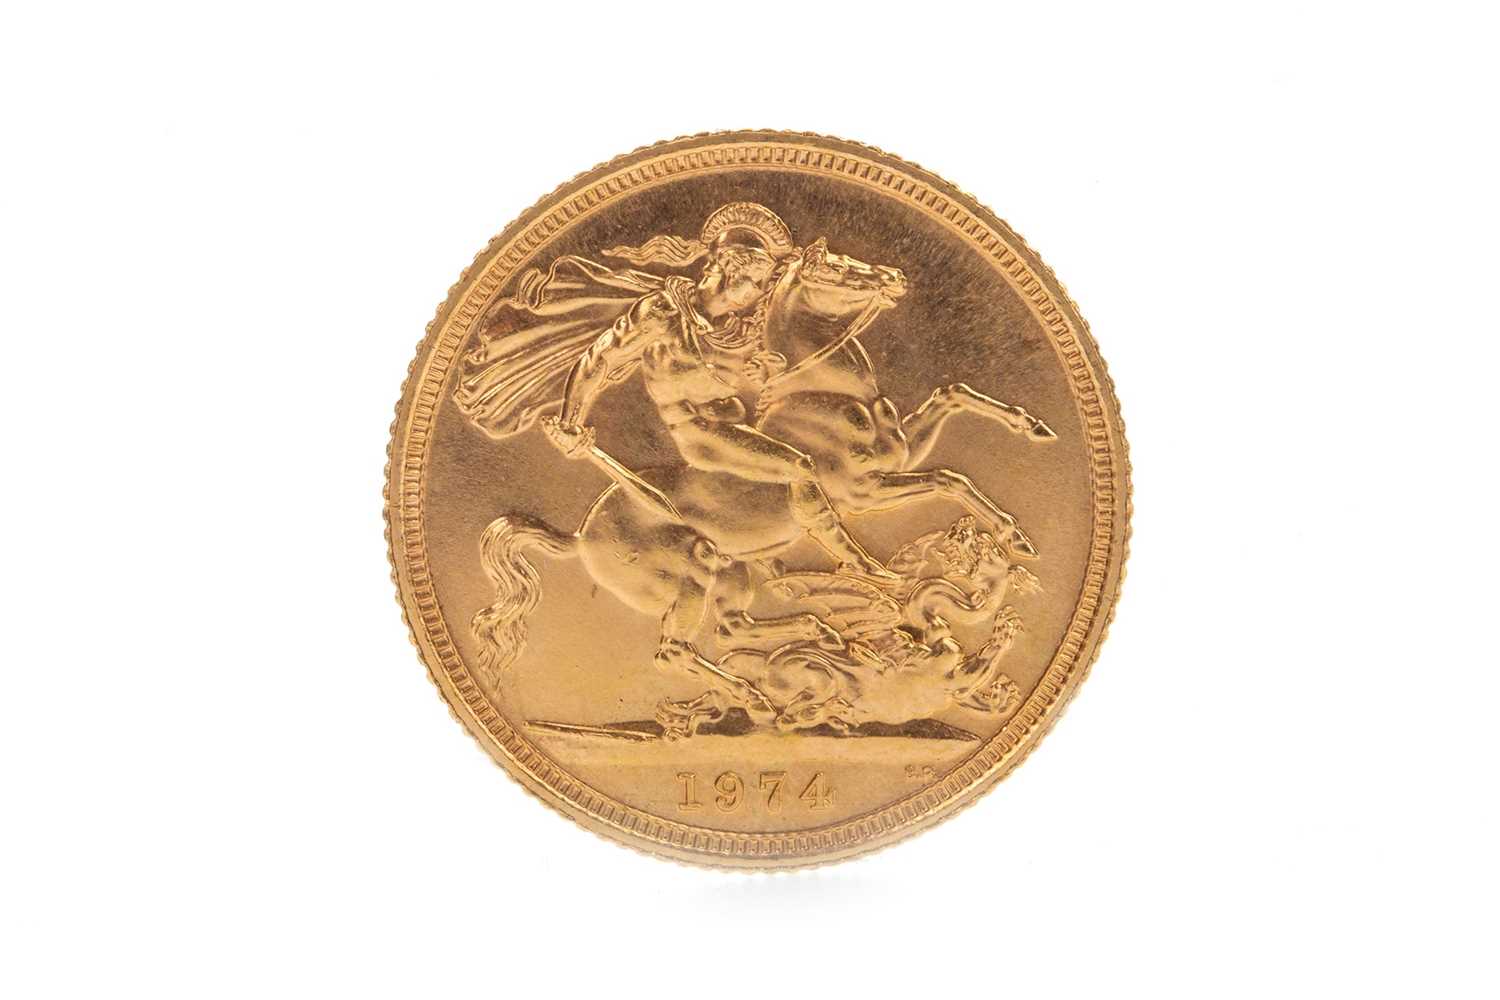 Lot 49 - A GOLD SOVEREIGN, 1974